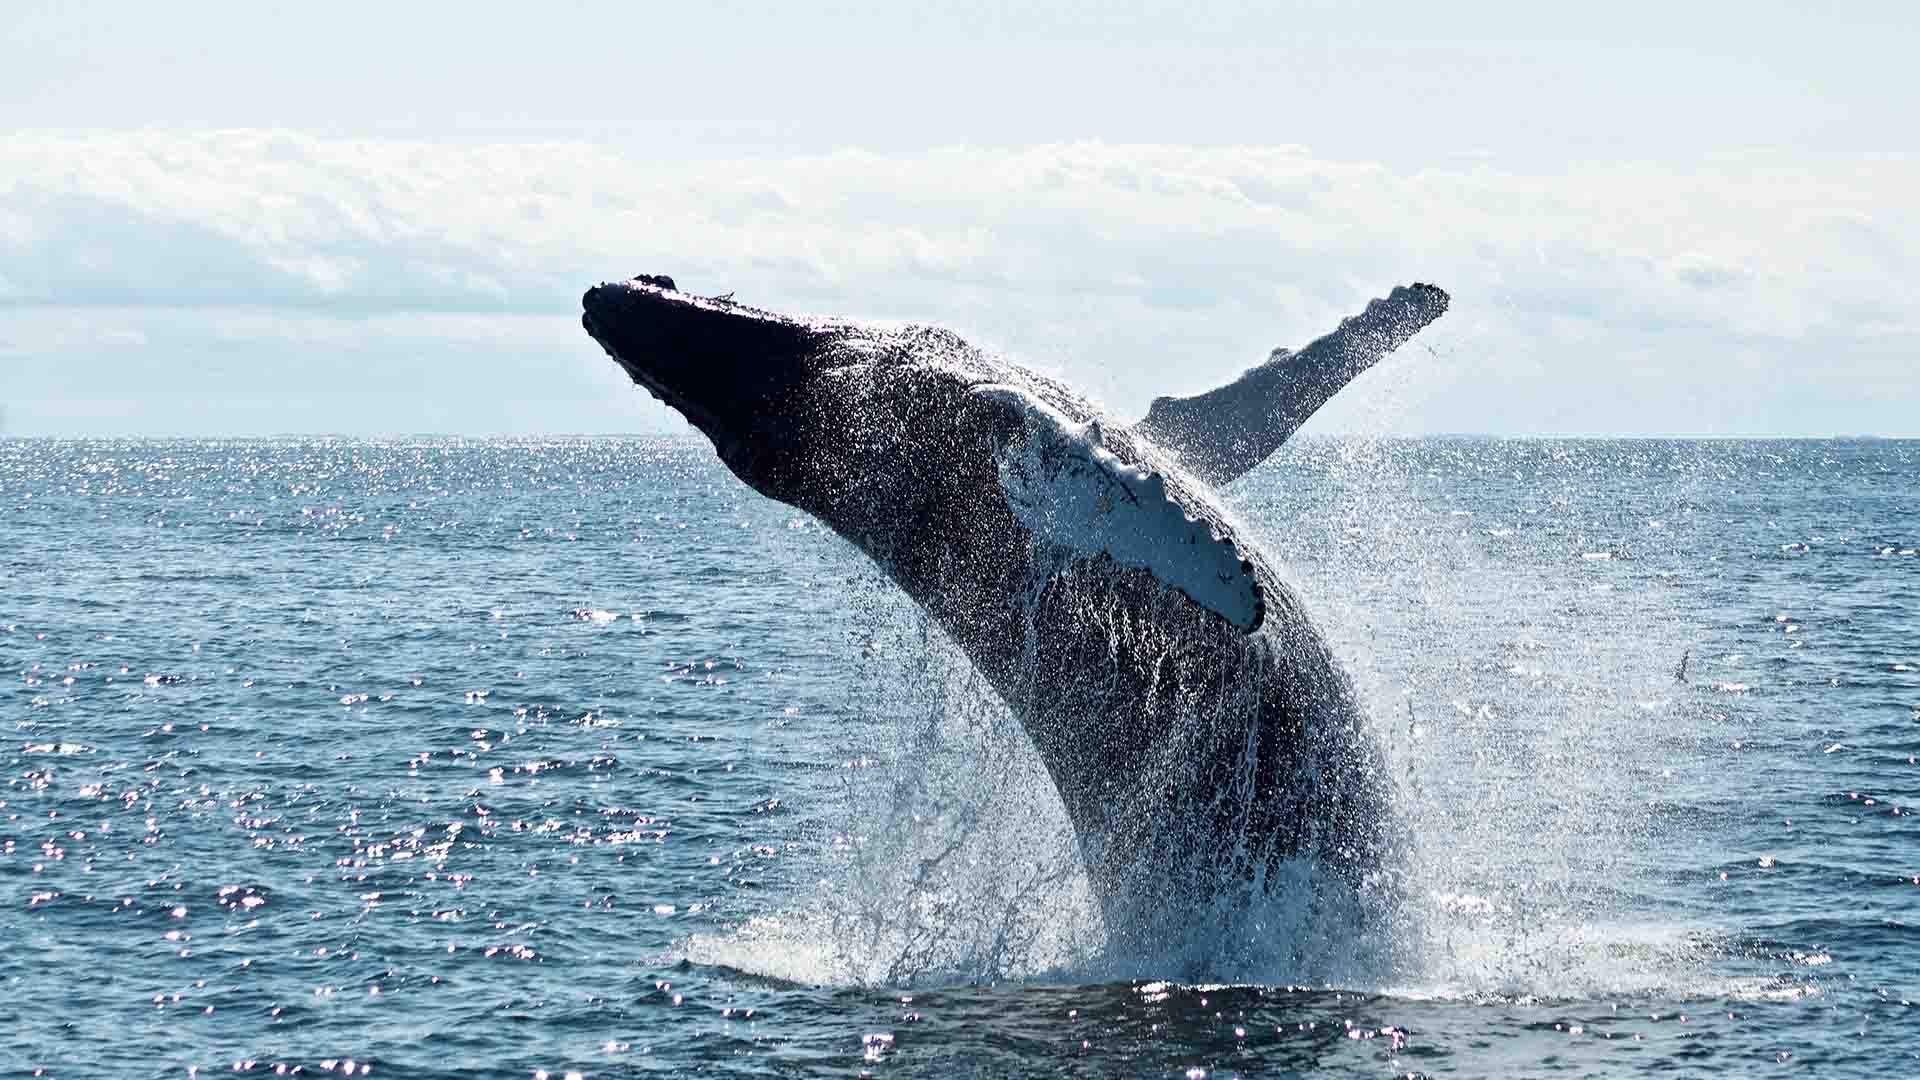 Whale breaching the water